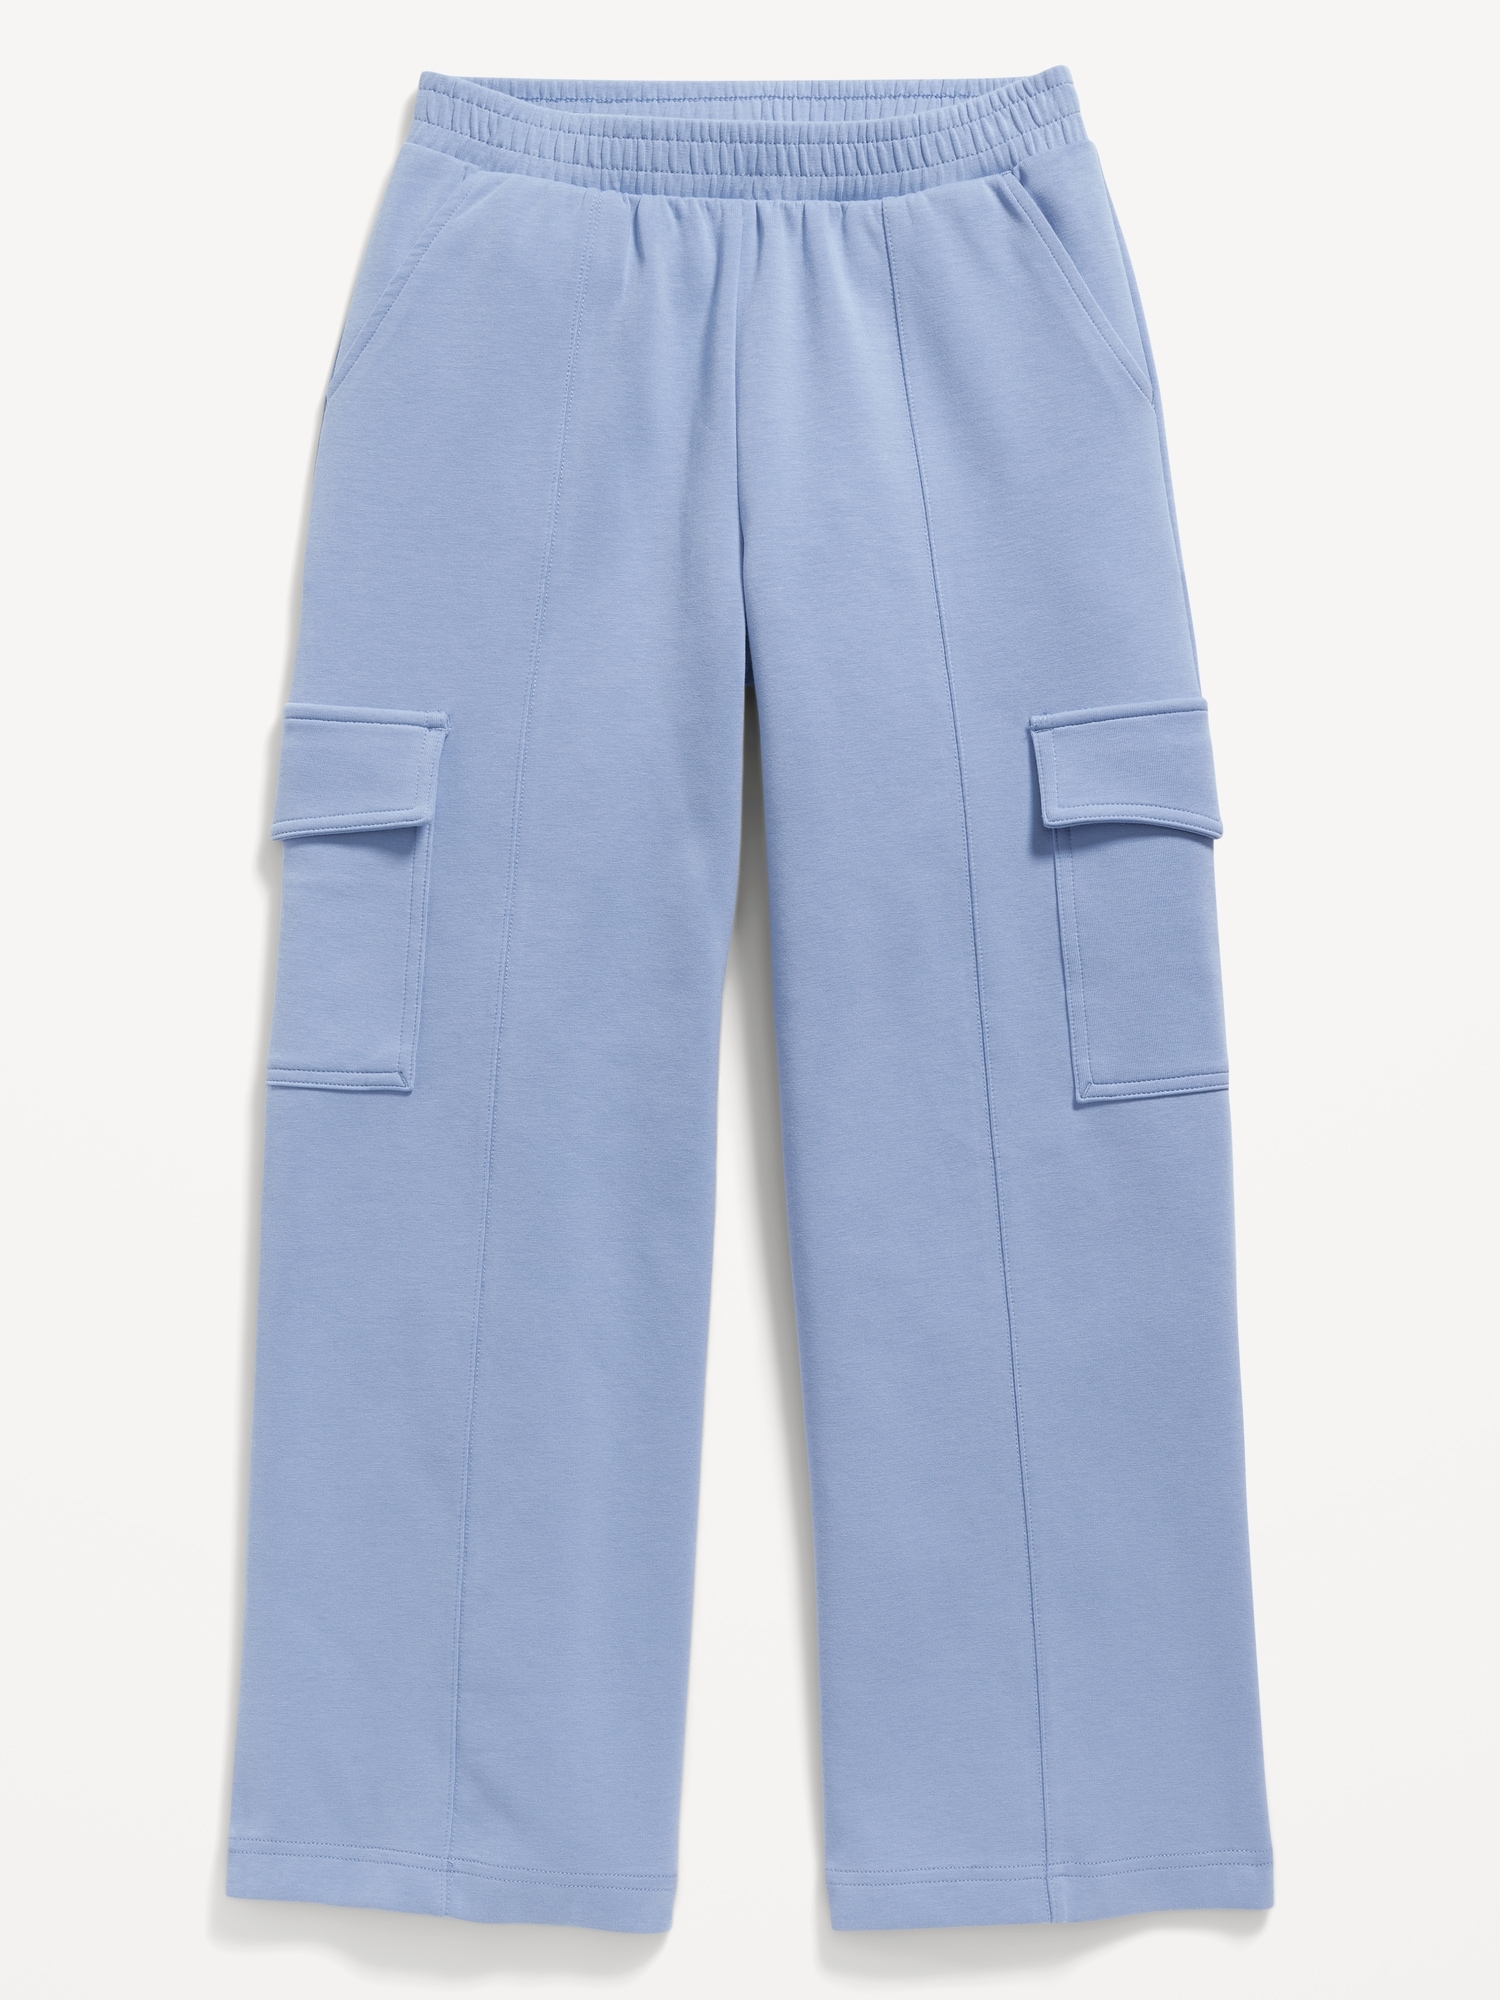 AVANDRESS Real Wide Cargo Pants Light Blue by W Concept